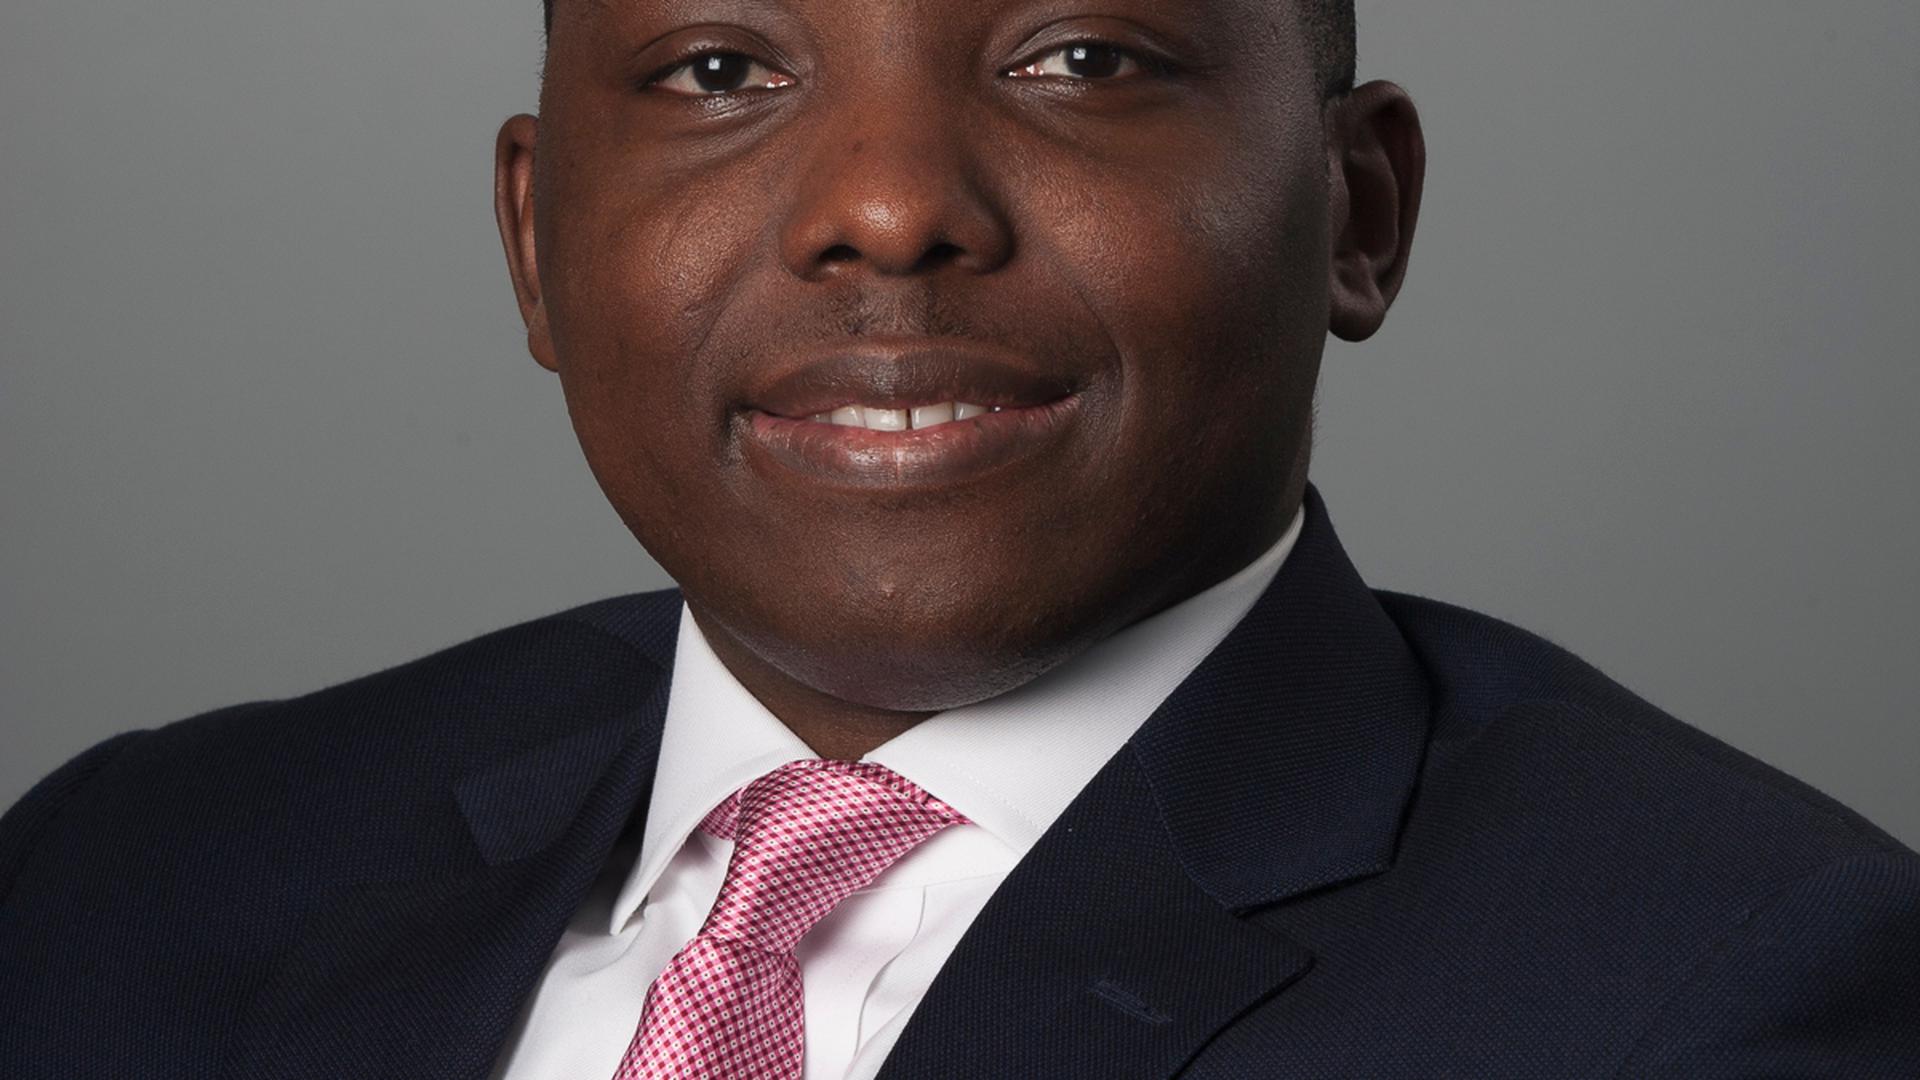 Amadi Ike was appointed as HSBC Private Bank Luxembourg's new COO